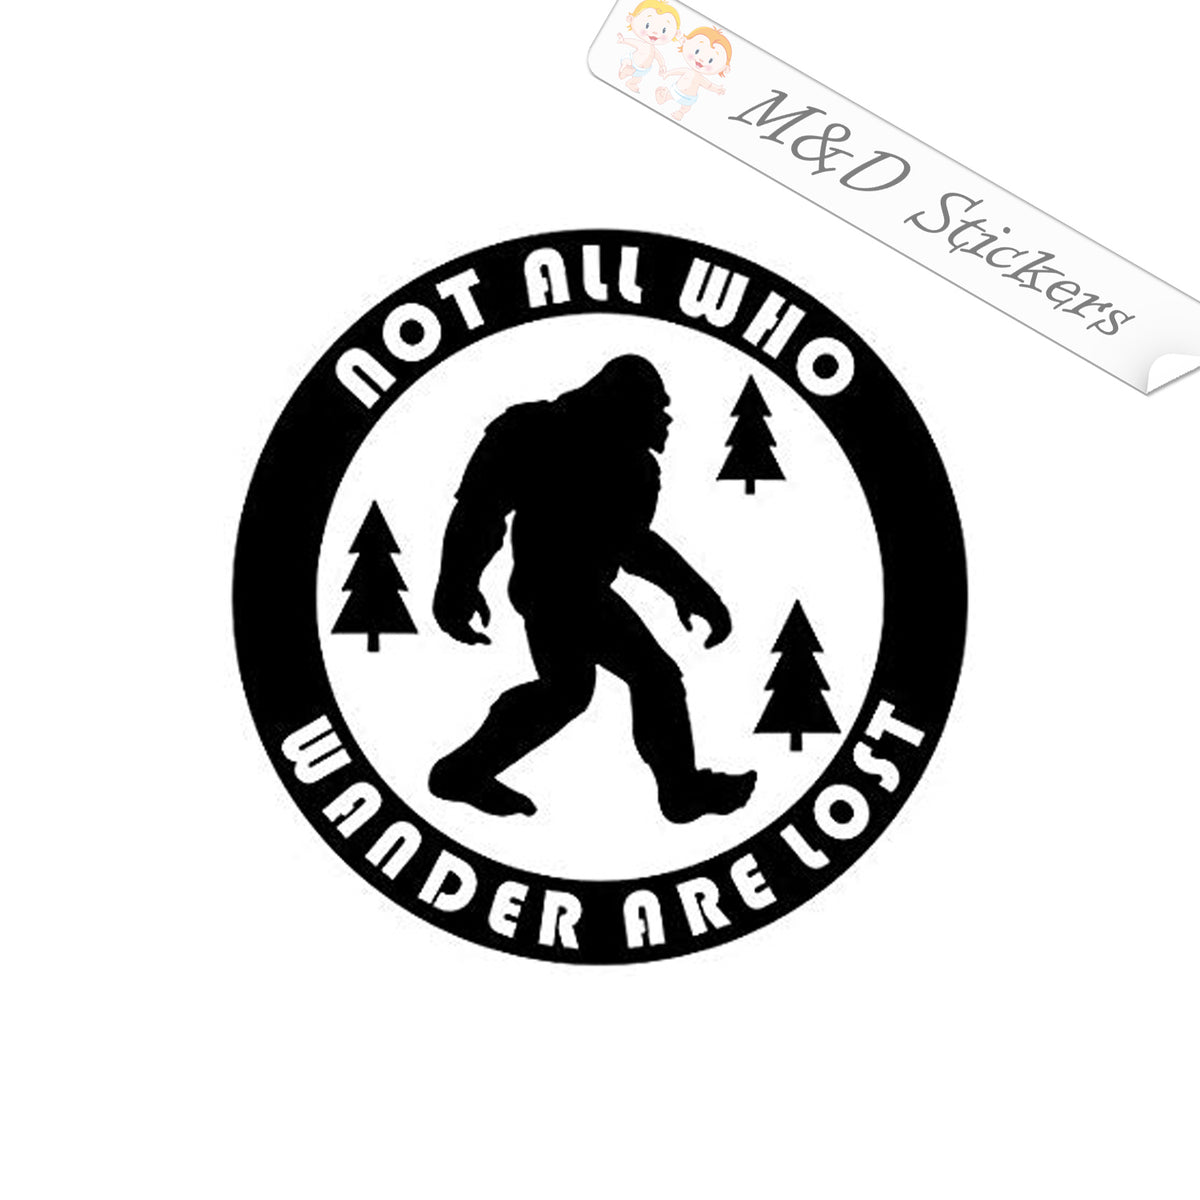 2x Yeti Vinyl Decal Sticker Different colors & size for Cars/Bikes/Win